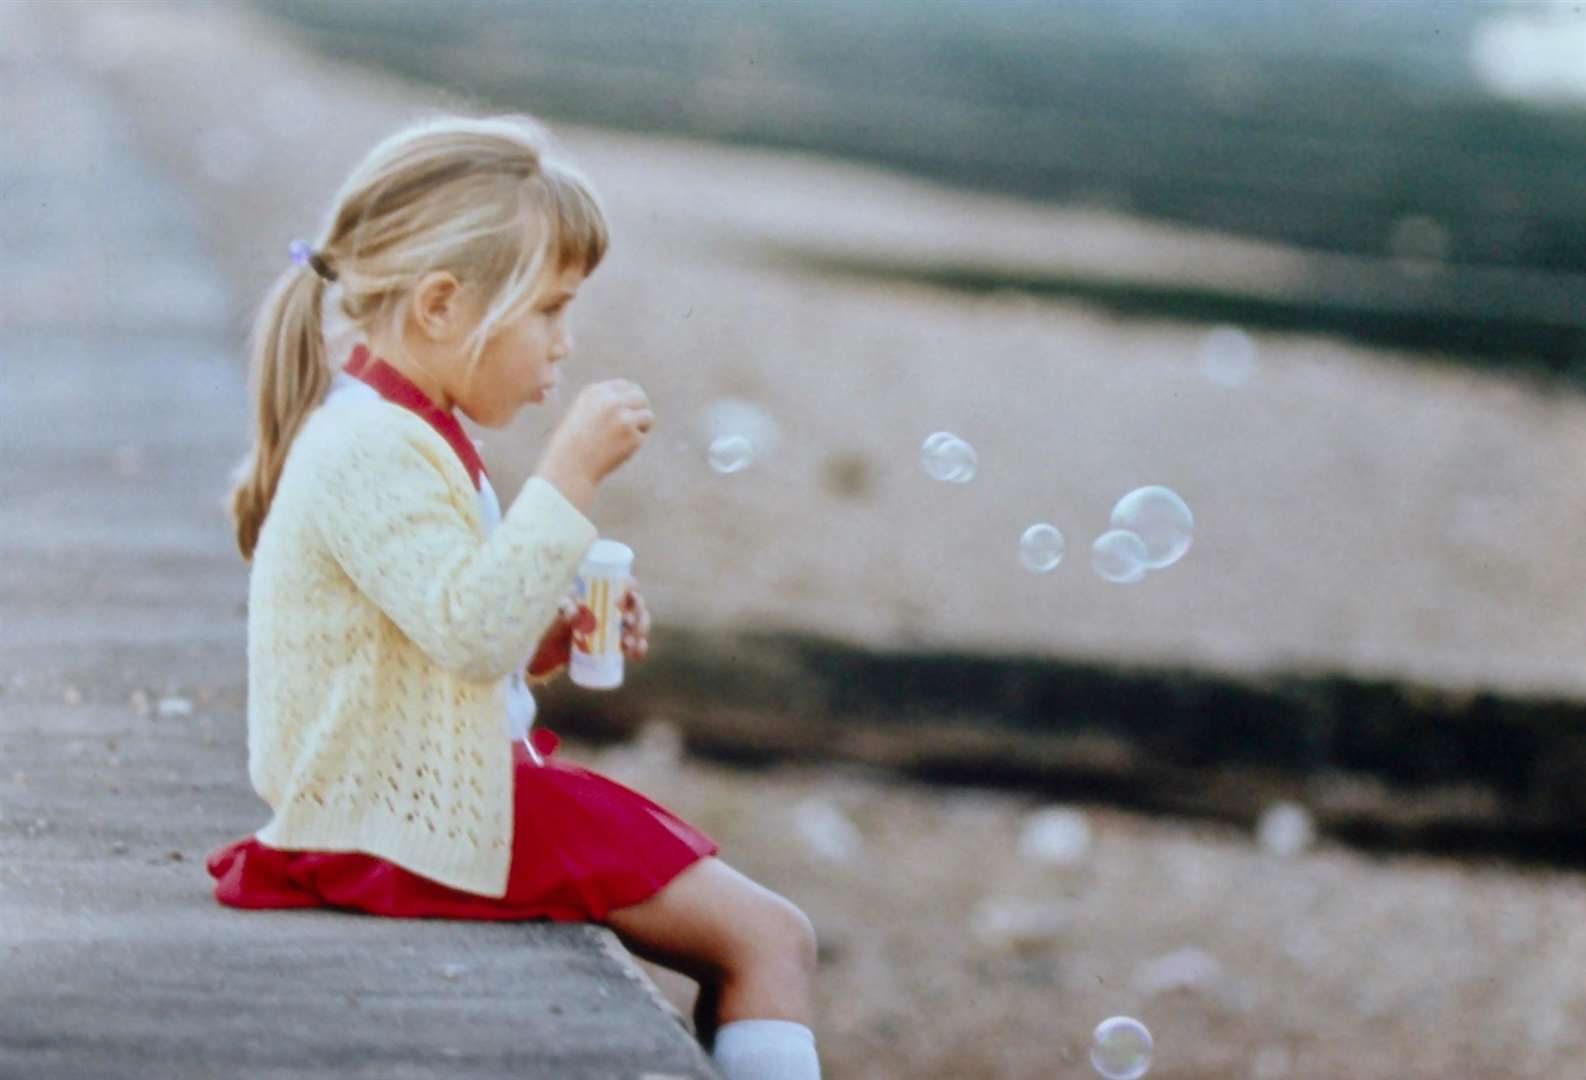 A cheap and simple pack of bubbles can teach children lots about the world around them